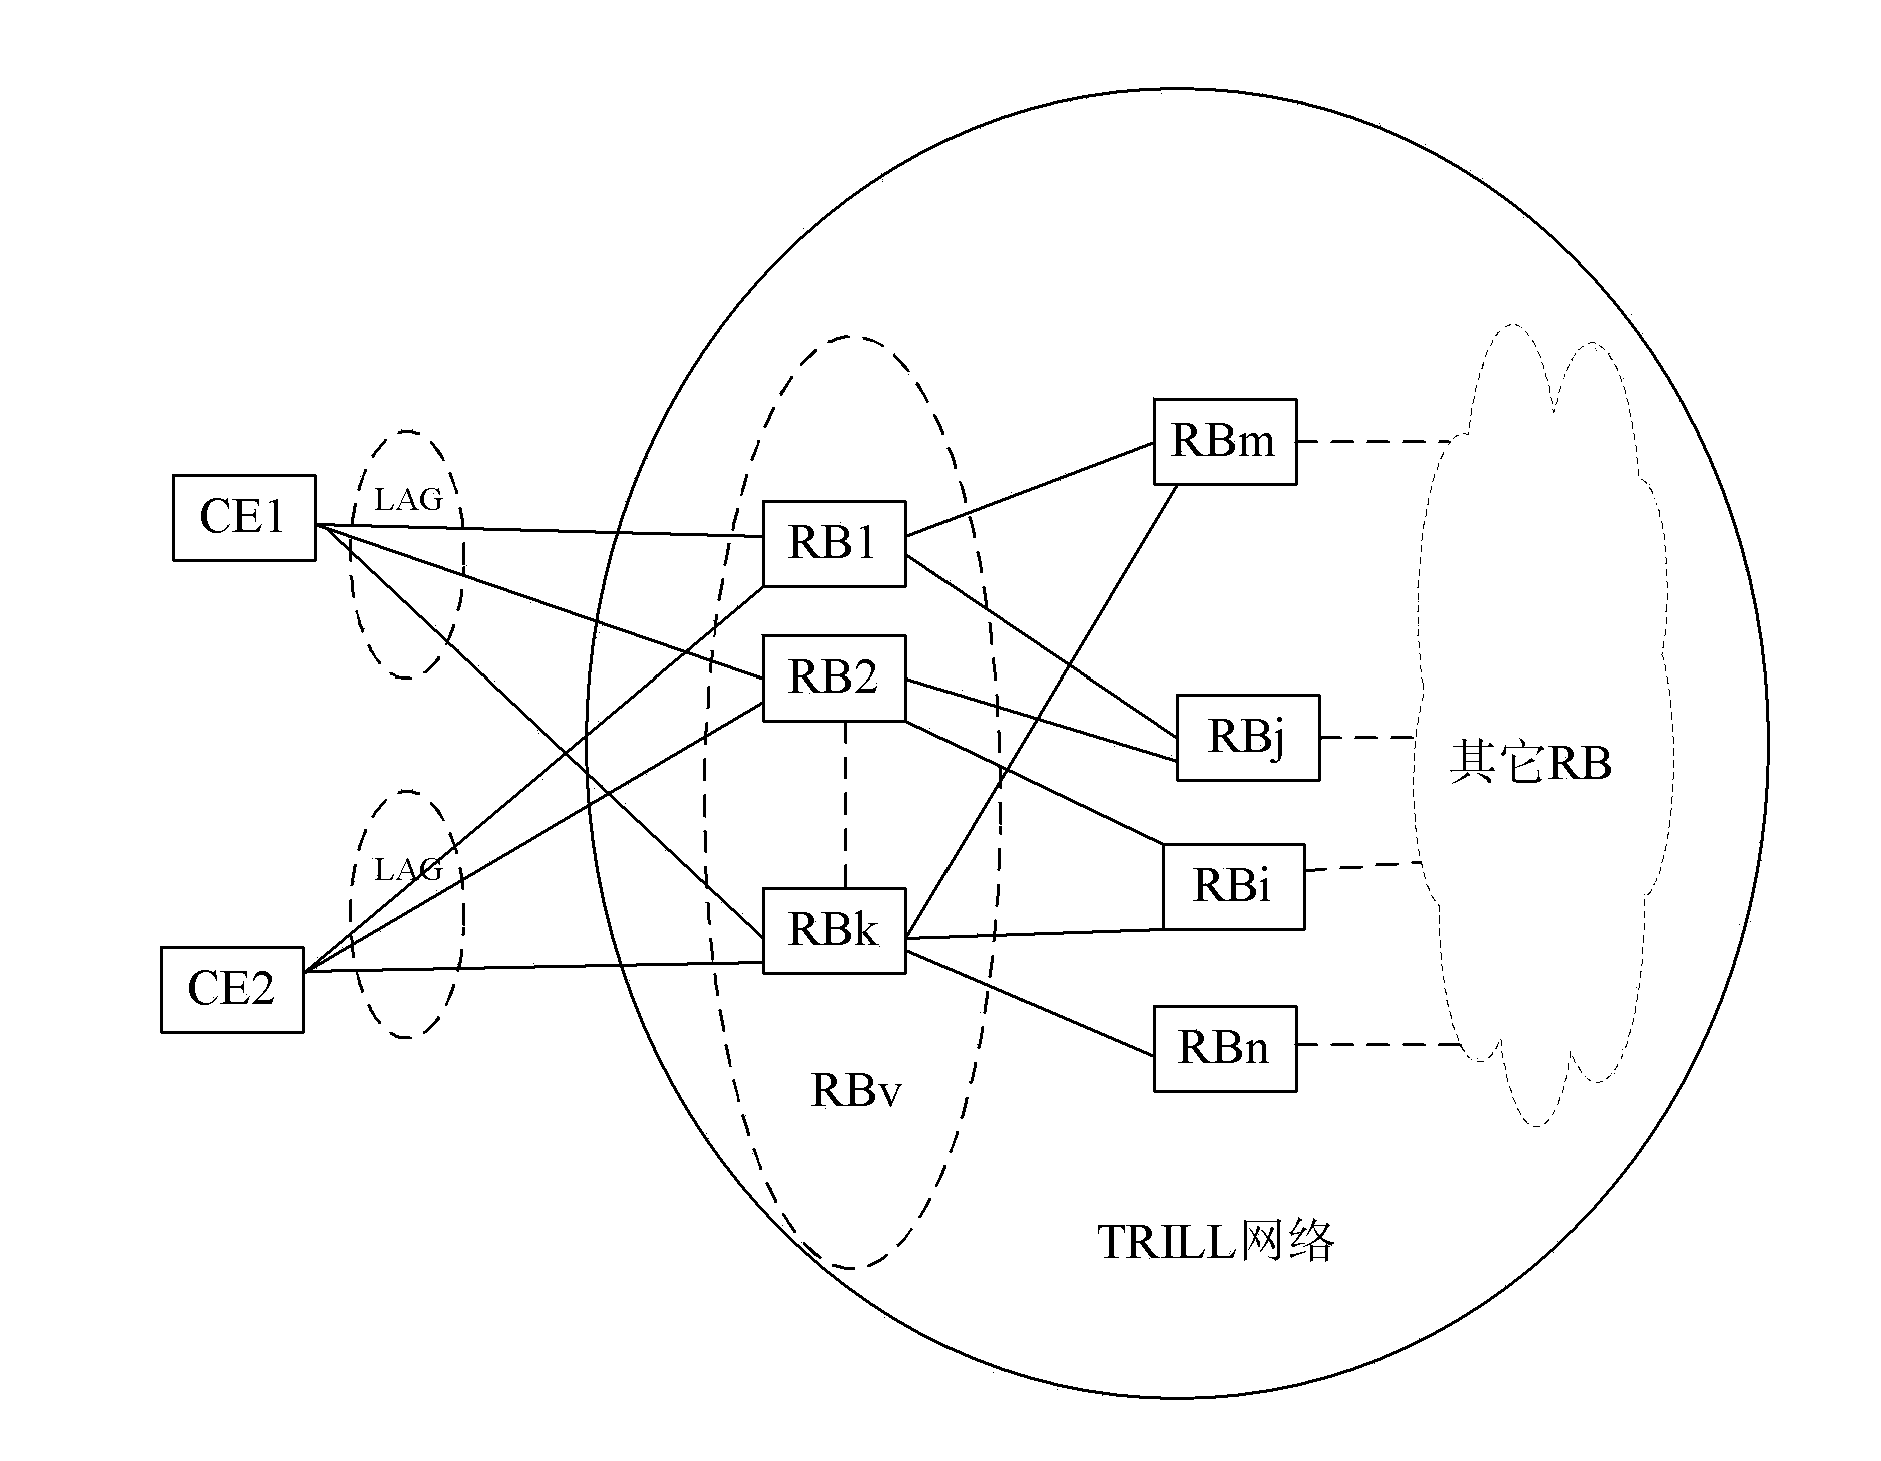 Tree root allocation and message processing method and routing network bridge